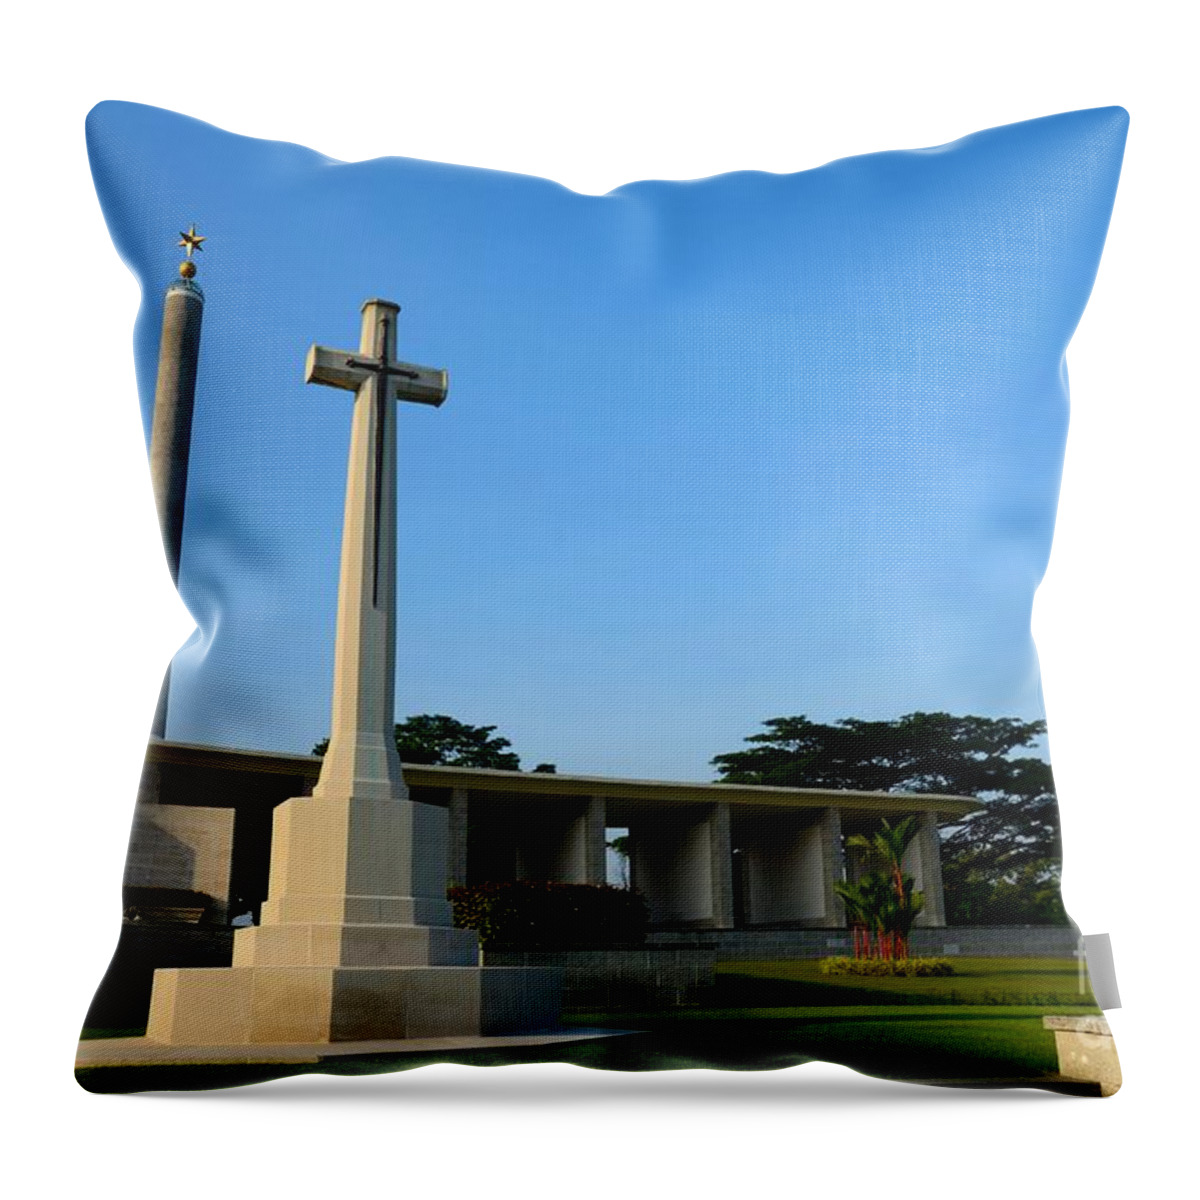 Kranji Throw Pillow featuring the photograph Commonwealth War Graves Commission Kranji Memorial cemetery monument Singapore by Imran Ahmed